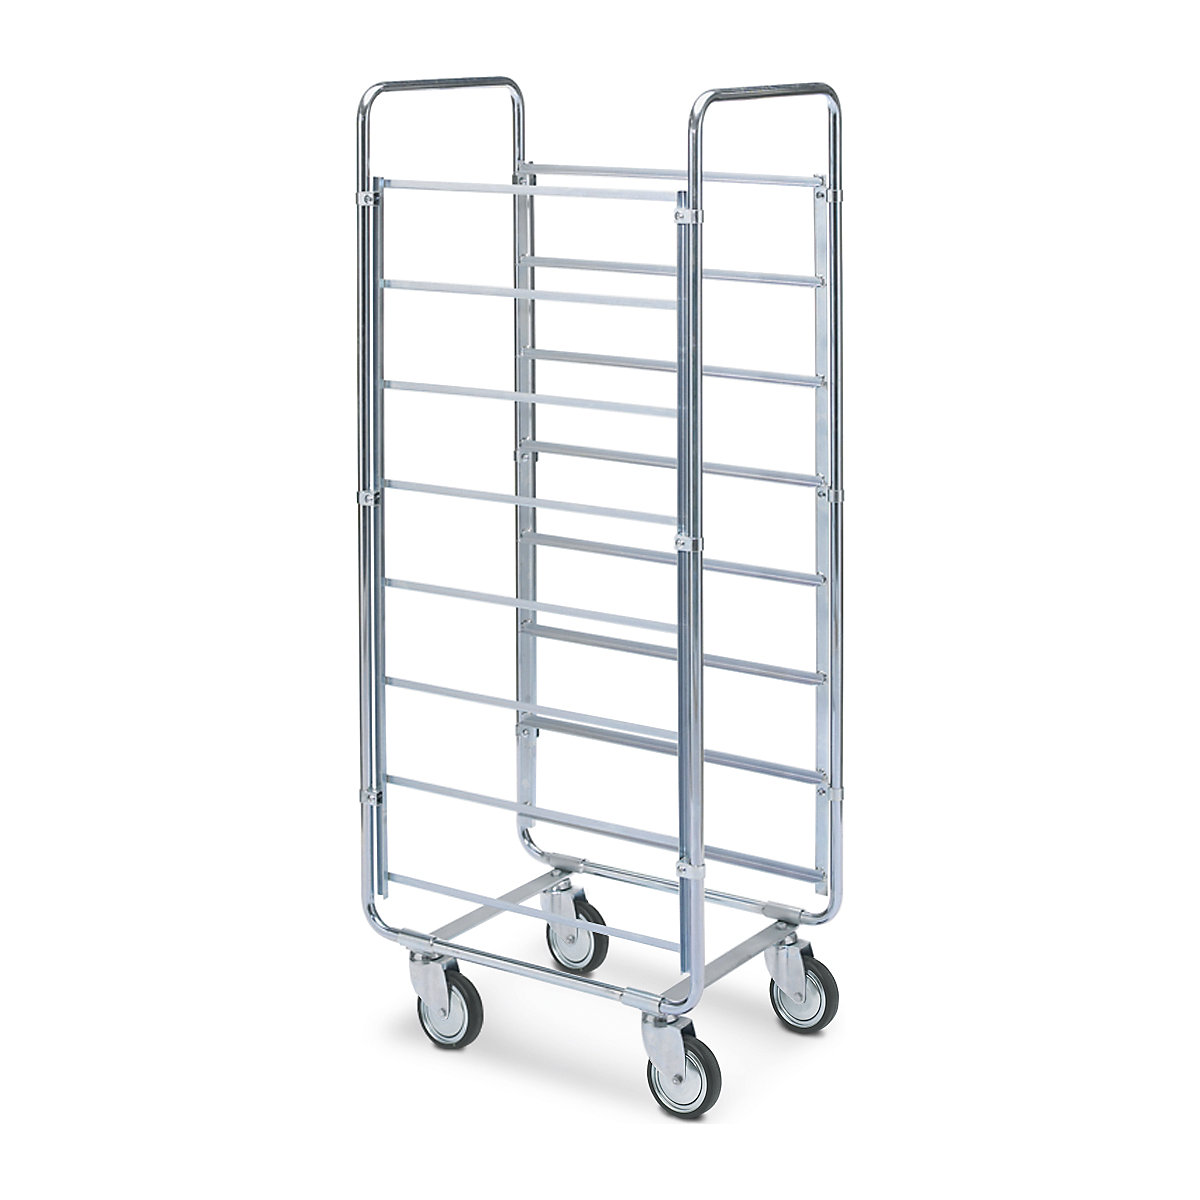 ESD tray and crate trolley – HelgeNyberg, LxWxH 670 x 465 x 1585 mm, for 8 crates, 5+ items-5